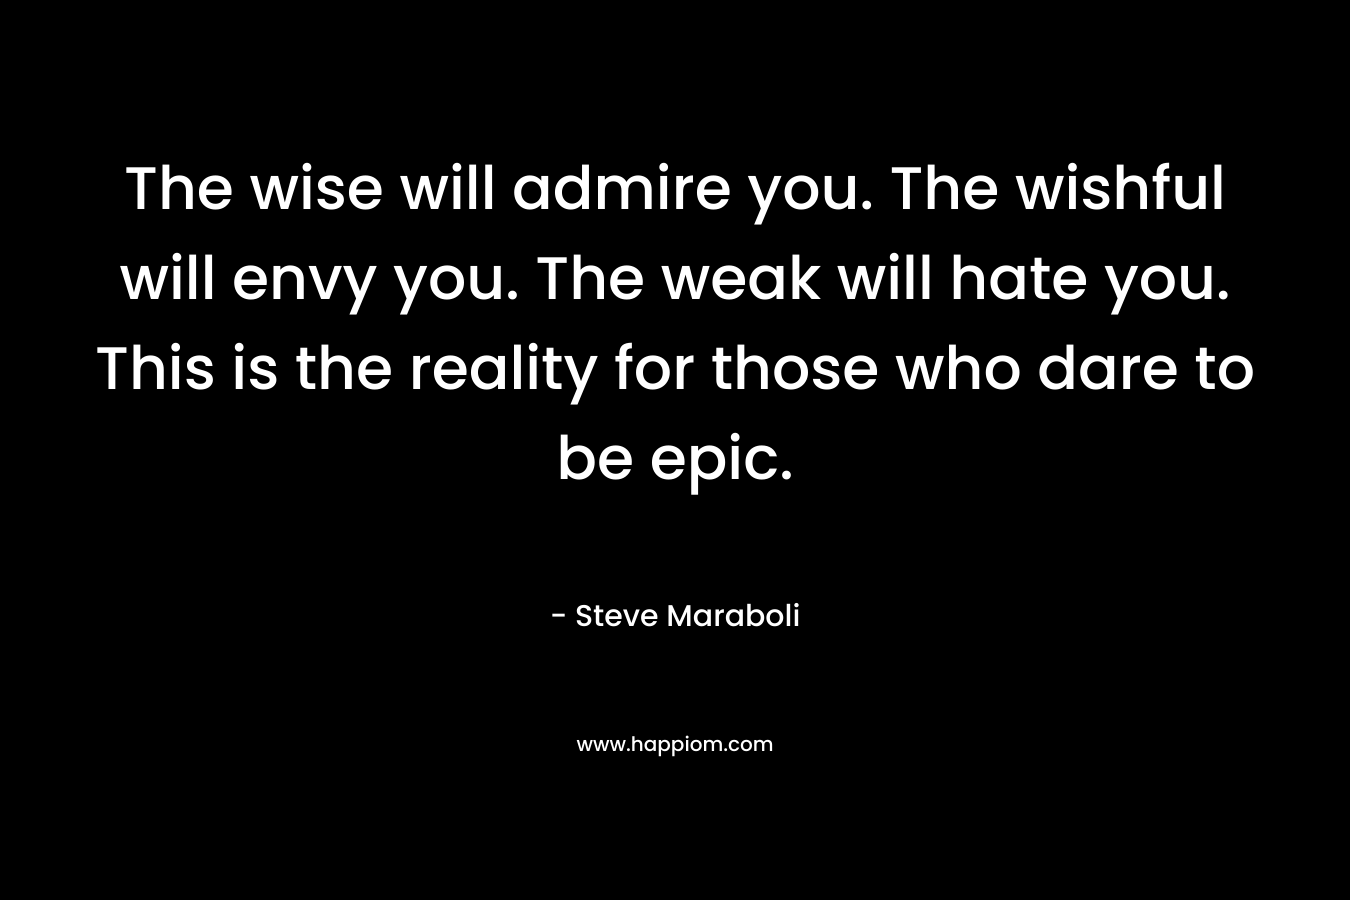 The wise will admire you. The wishful will envy you. The weak will hate you. This is the reality for those who dare to be epic.